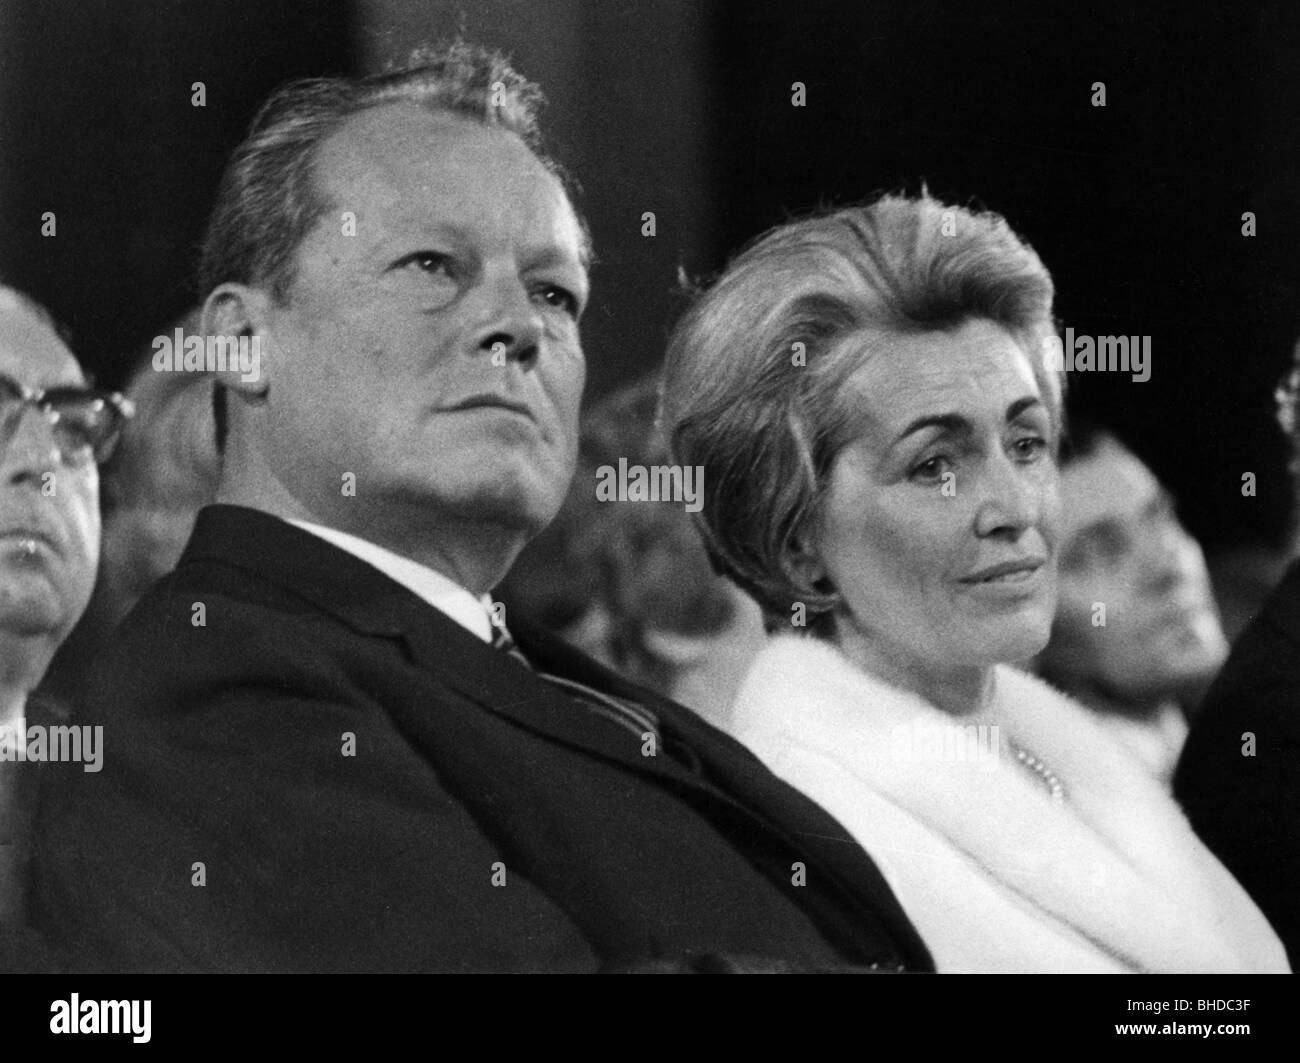 Brandt, Willy, 18.12.1913 - 8.10.1992, German politician (SPD), half length, during the award ceremony for the Theodor Heuss Prize, Munich, 8.2.1970, with Hildegard Hamm-Brücher, Stock Photo